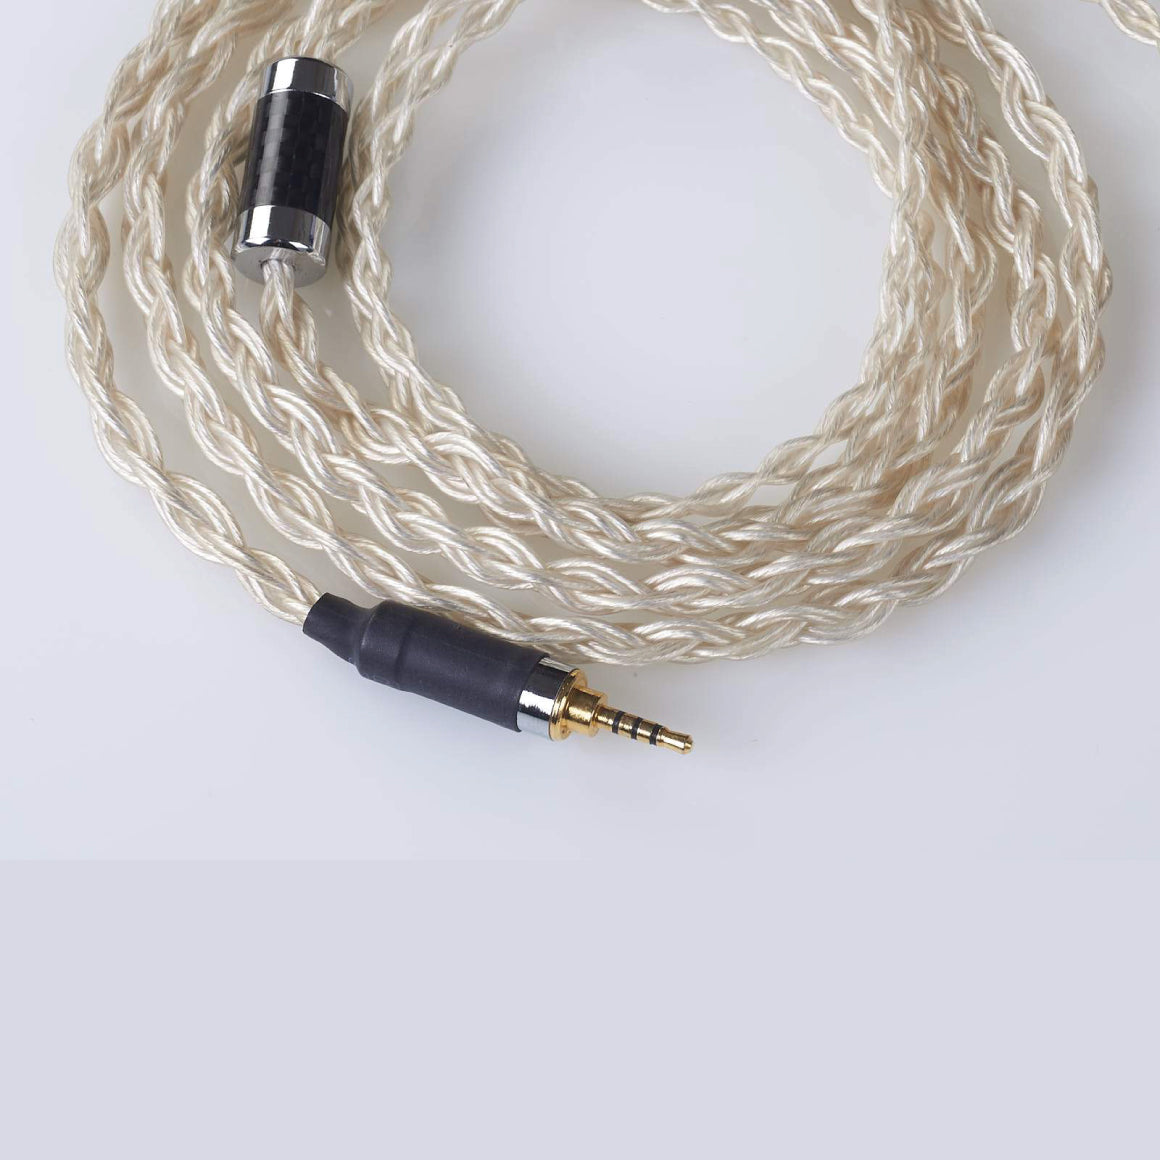 Headgear Audio - Litsa Silver Upgrade Cable For Sennheiser HD800 - 2.5mm TRRS (Balanced/For Astell&Kern And Onkyo)